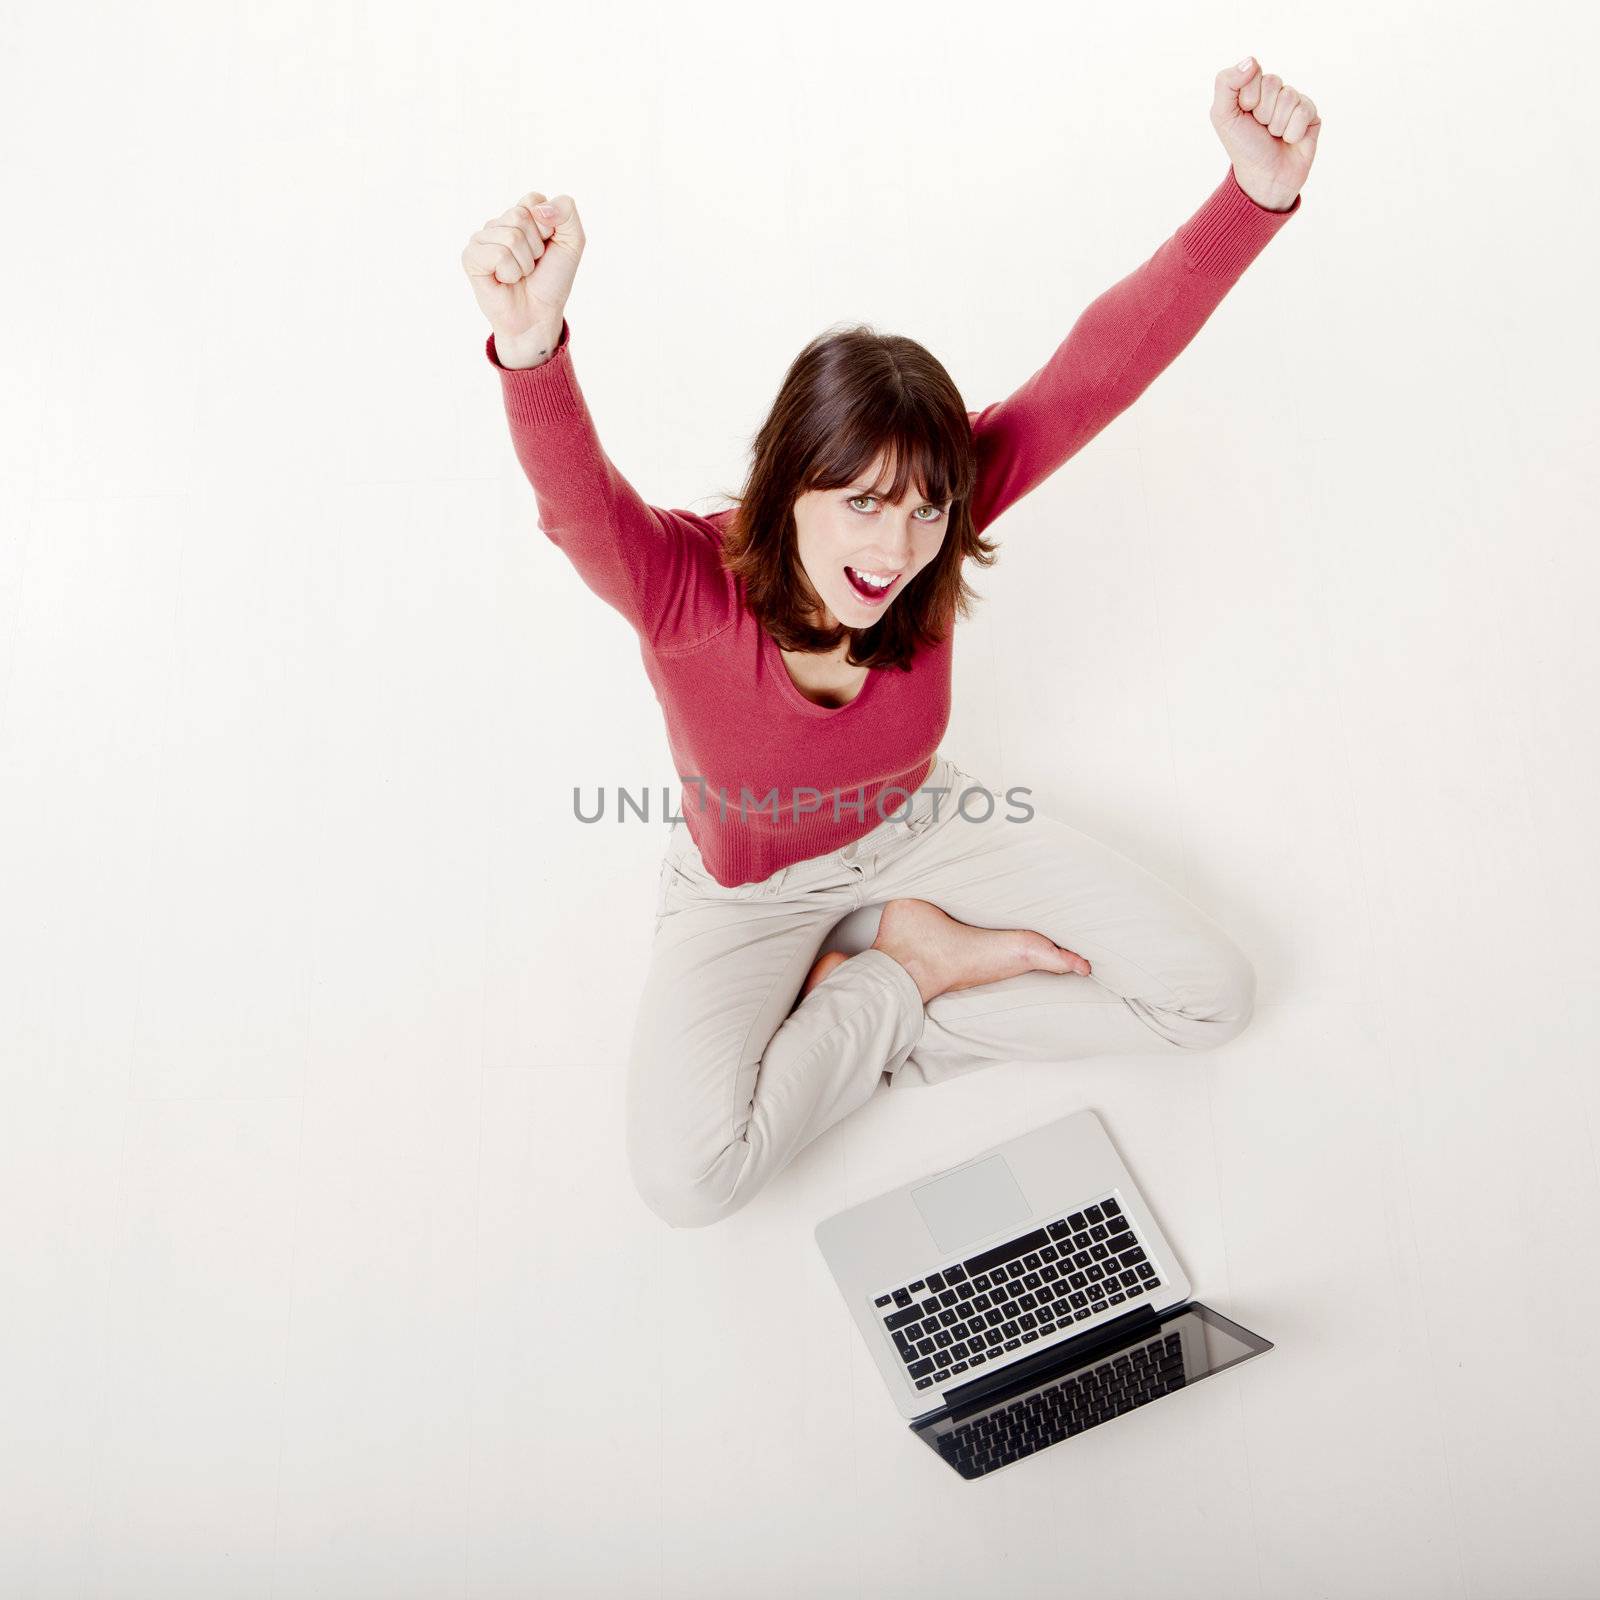 Happy woman with arms raised, sitting on the floor with a laptop